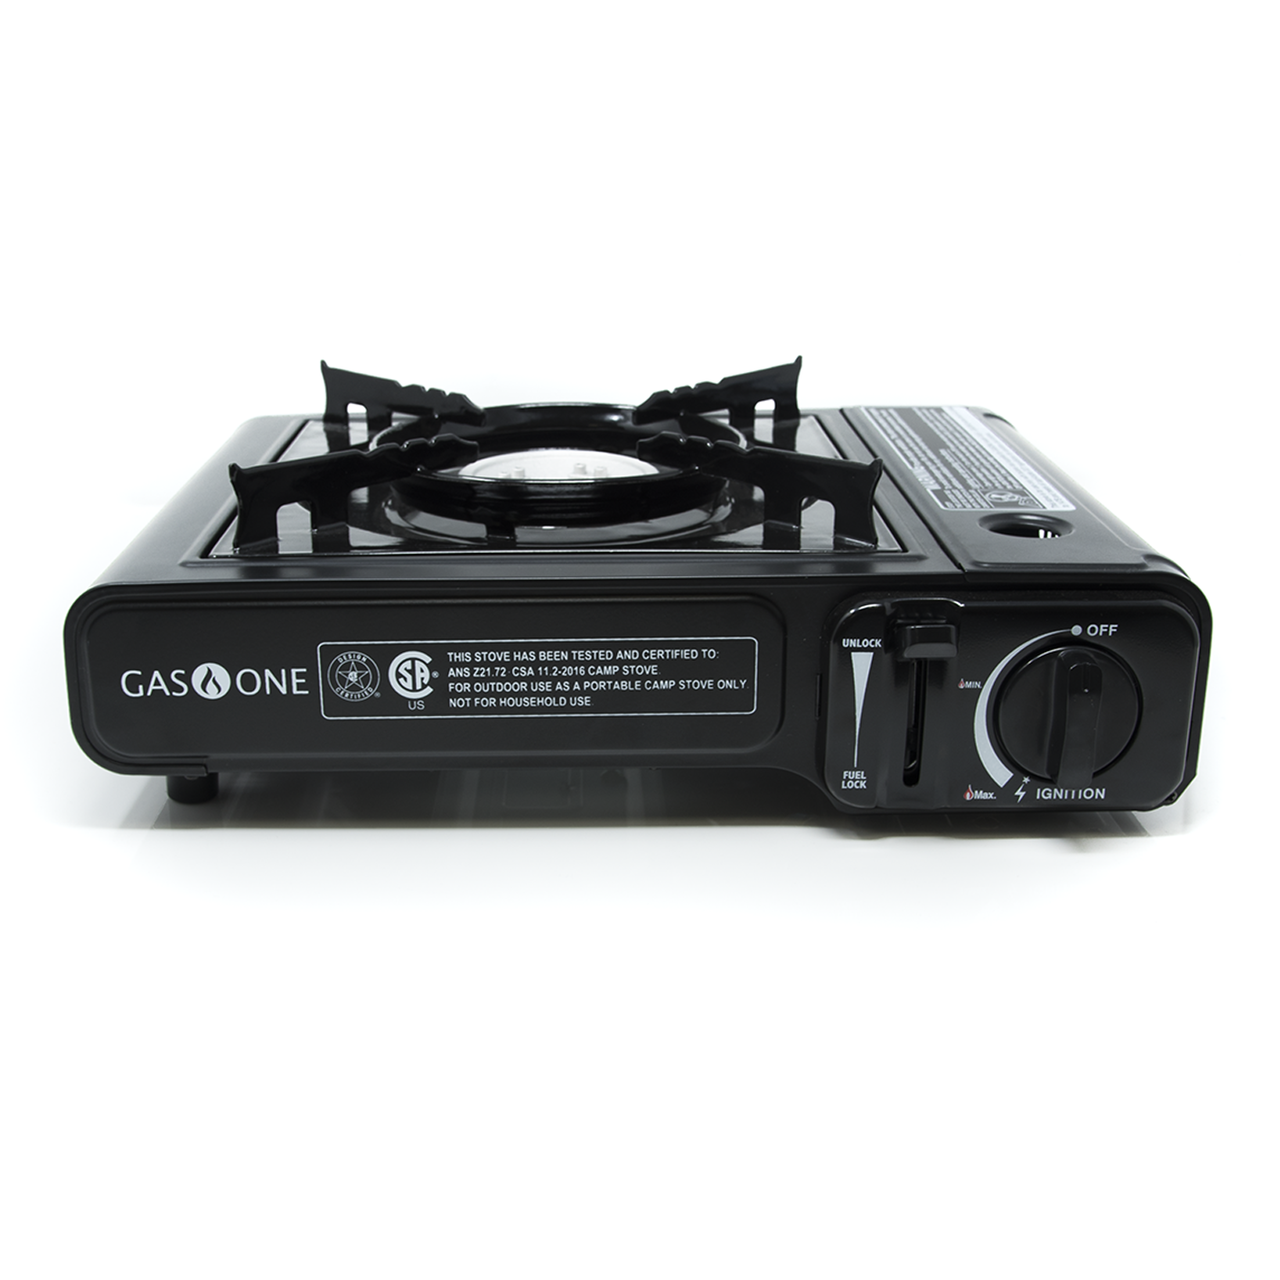 GAS-ONE PORTABLE SINGLE BURNER GAS STOVE – General Army Navy Outdoor